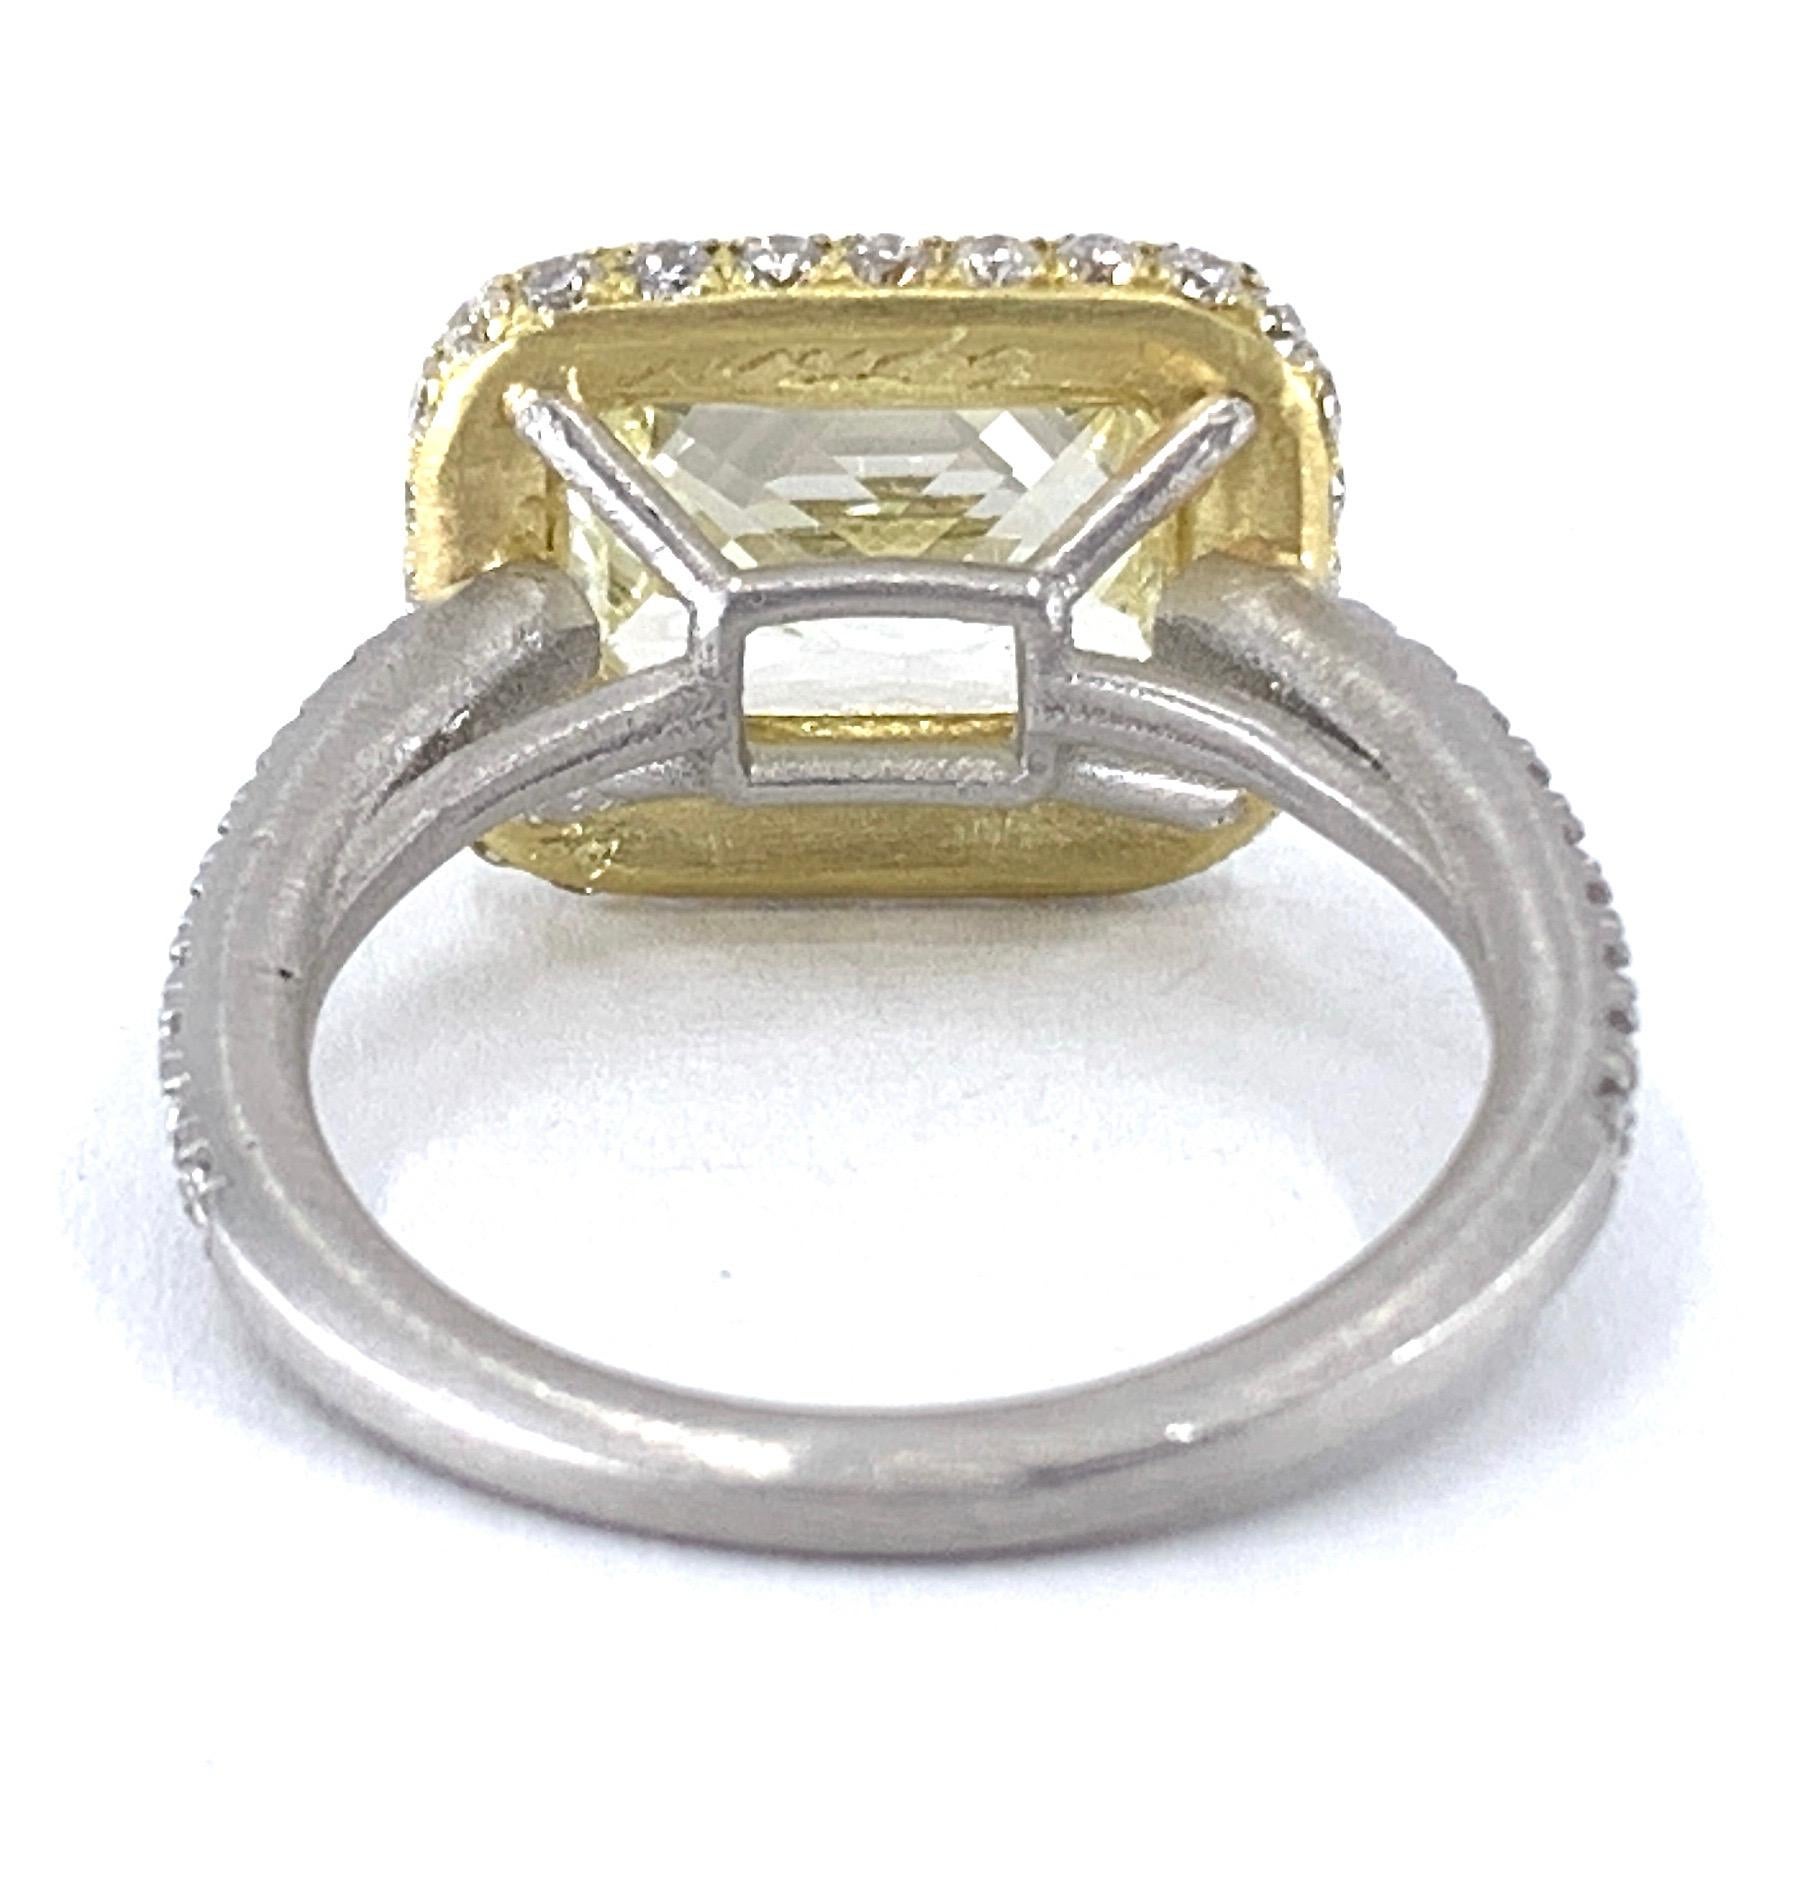 GIA Certified 3.55 Carat Radiant Cut Pale Yellow Diamond Halo Ring In New Condition For Sale In Sherman Oaks, CA